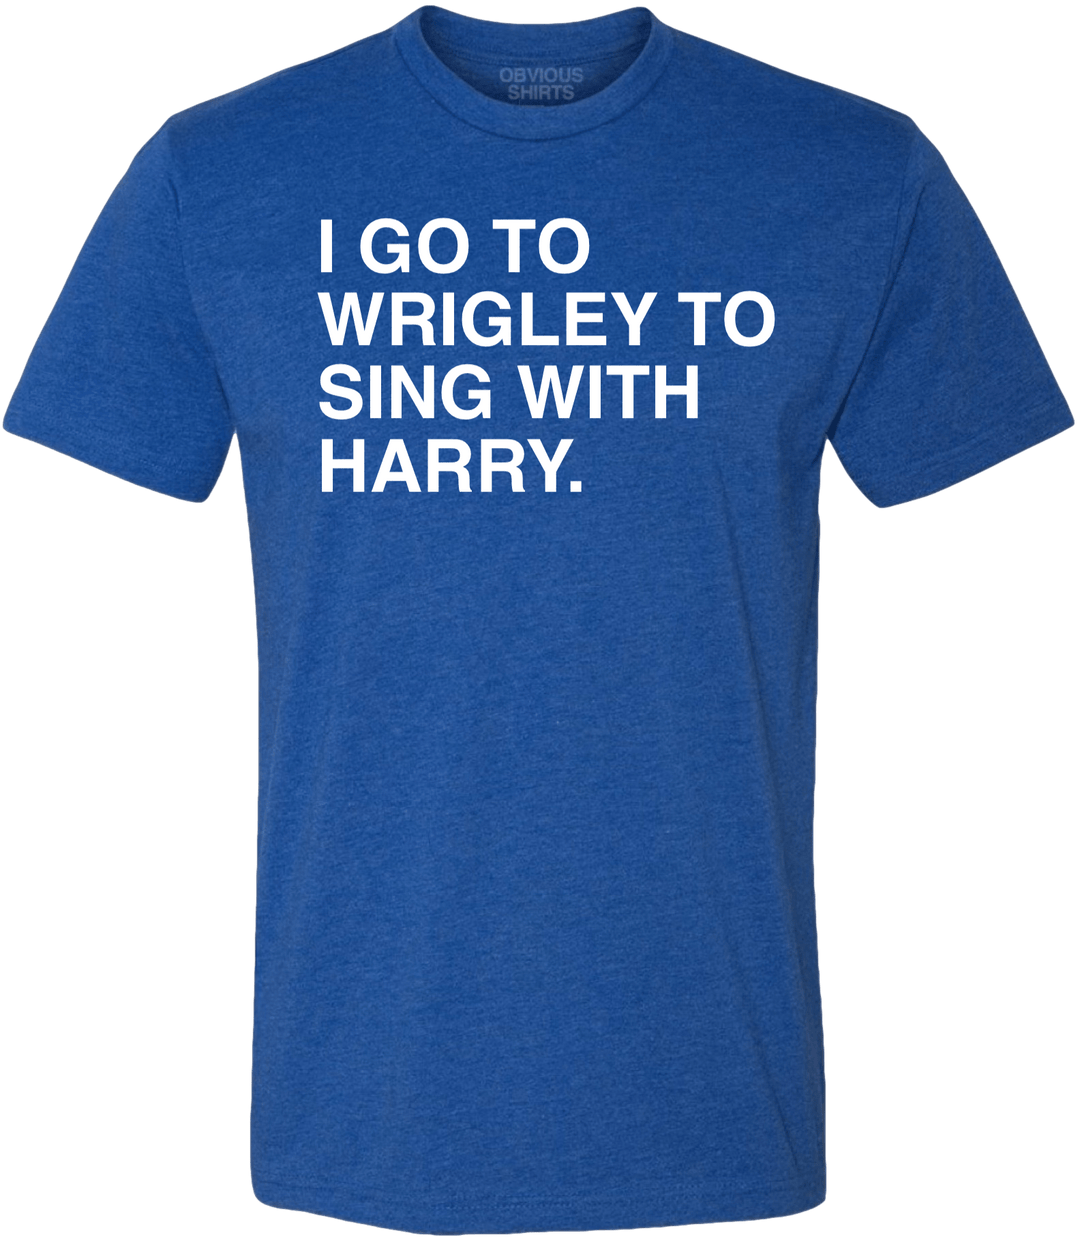 I GO TO WRIGLEY TO SING WITH HARRY. - OBVIOUS SHIRTS